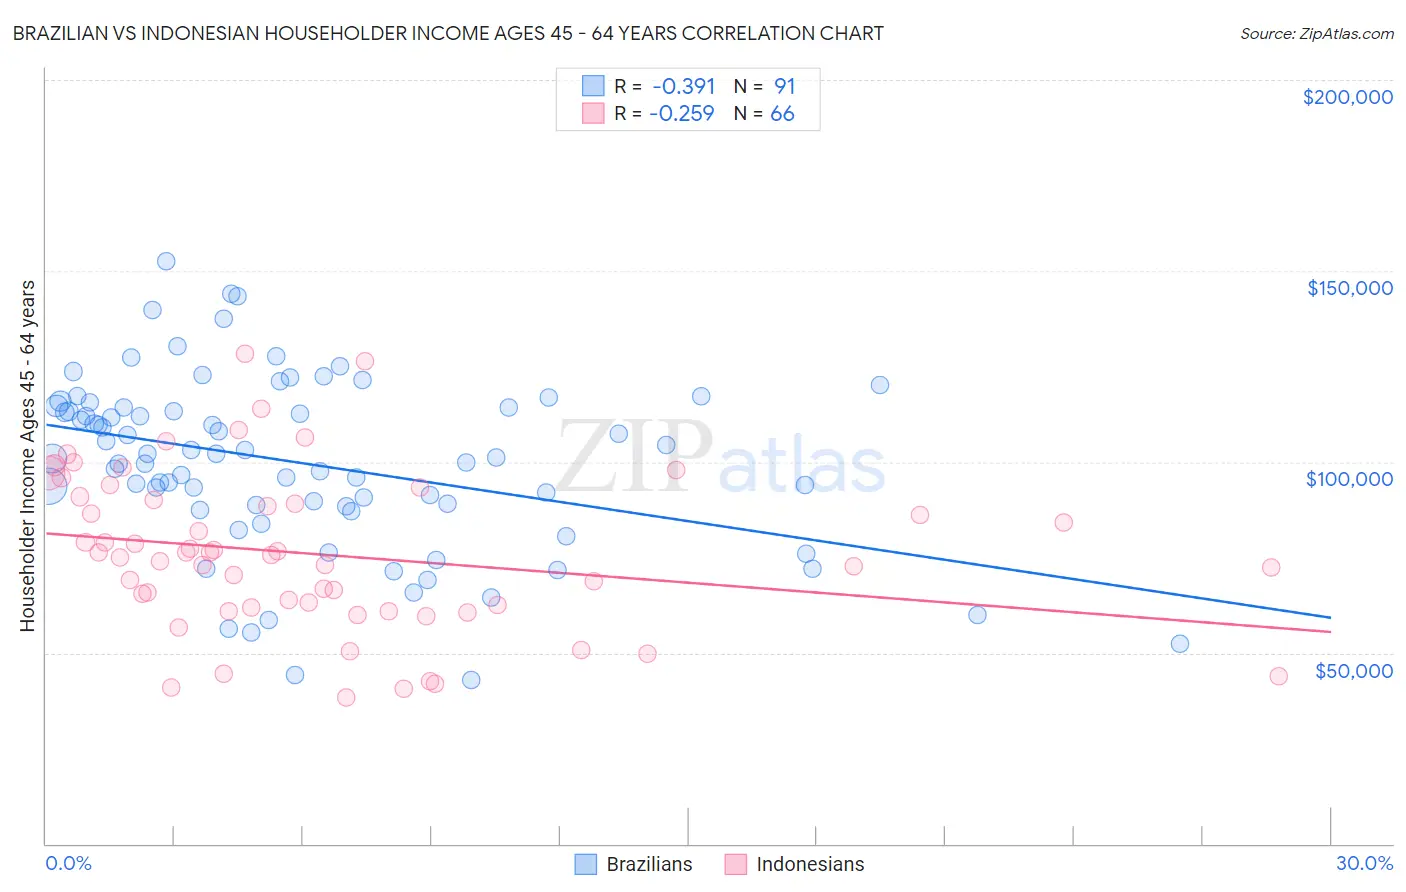 Brazilian vs Indonesian Householder Income Ages 45 - 64 years